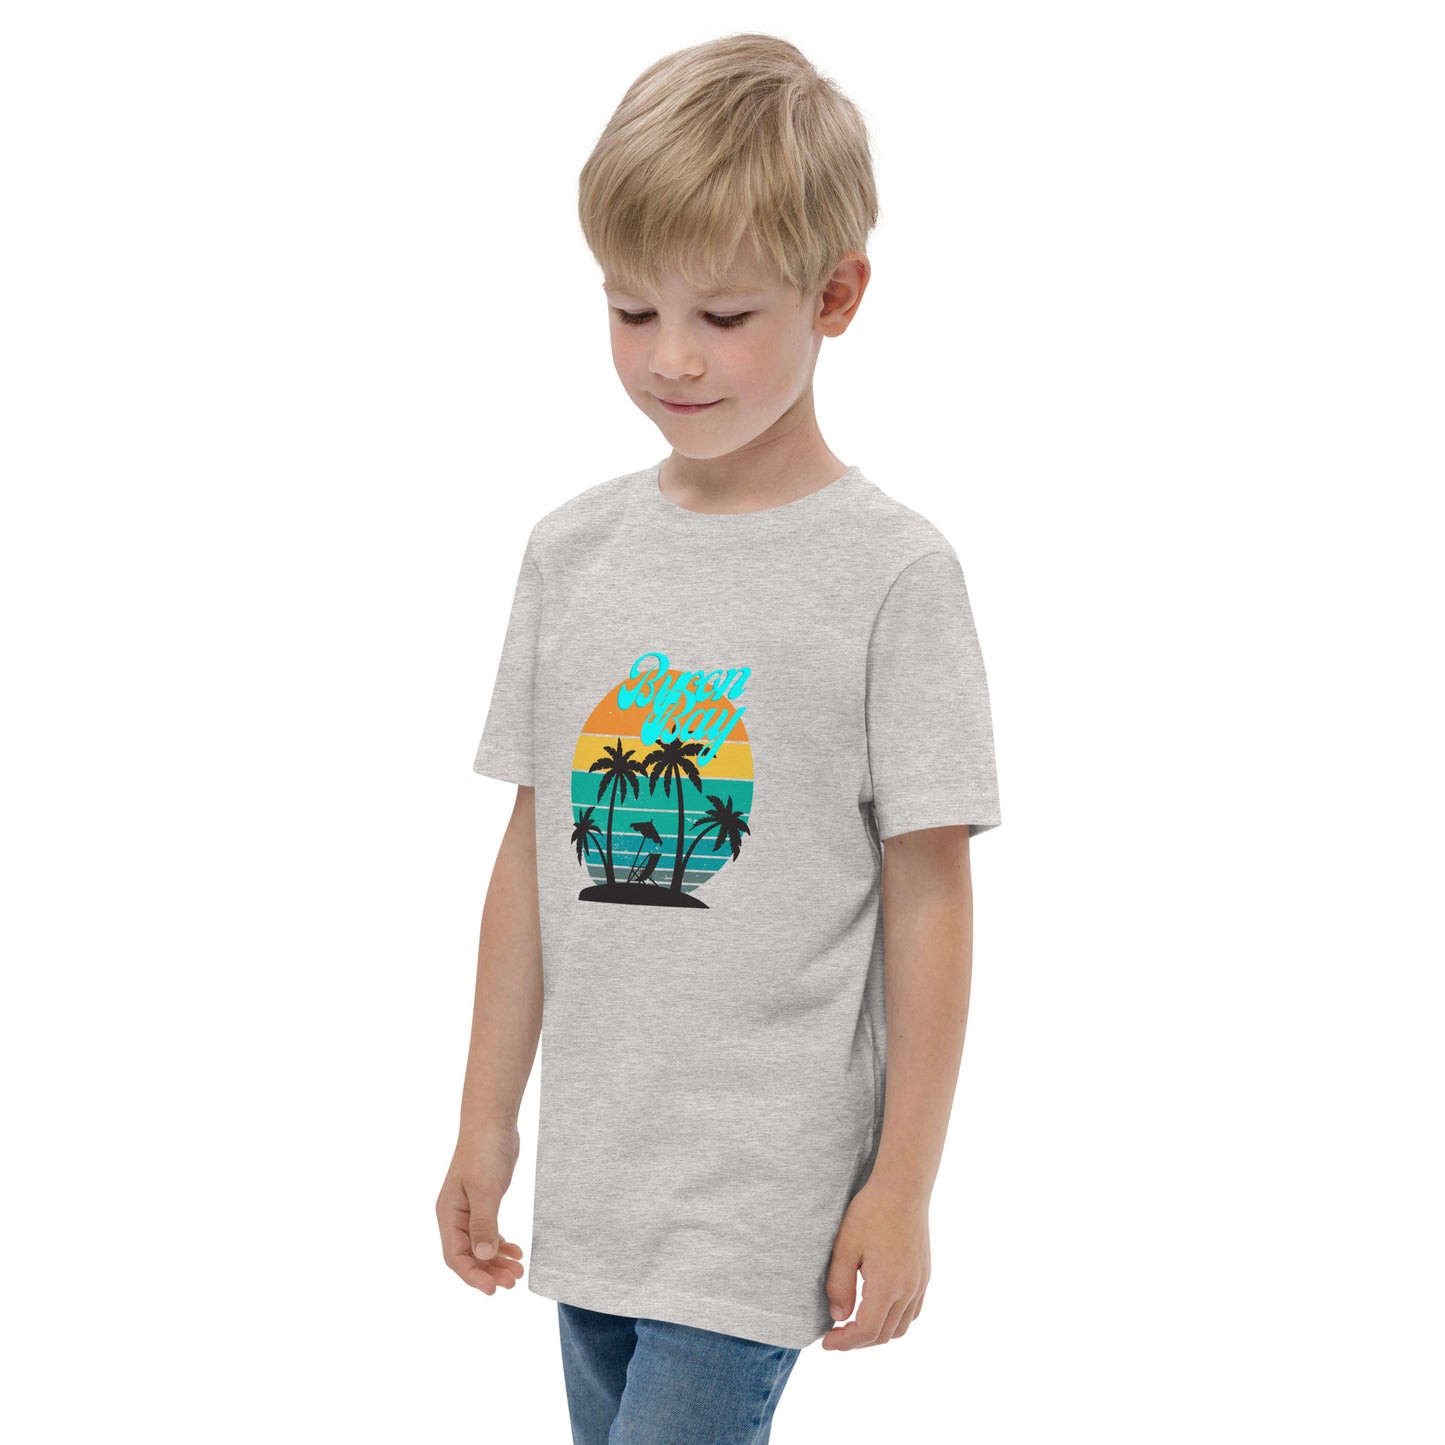  Kids T-Shirt - Natural / Heather colour - Side view, being warn on boy standing with his arms by his side - Byron Bay design on front - Genuine Byron Bay Merchandise | Produced by Go Sea Kayak Byron Bay 